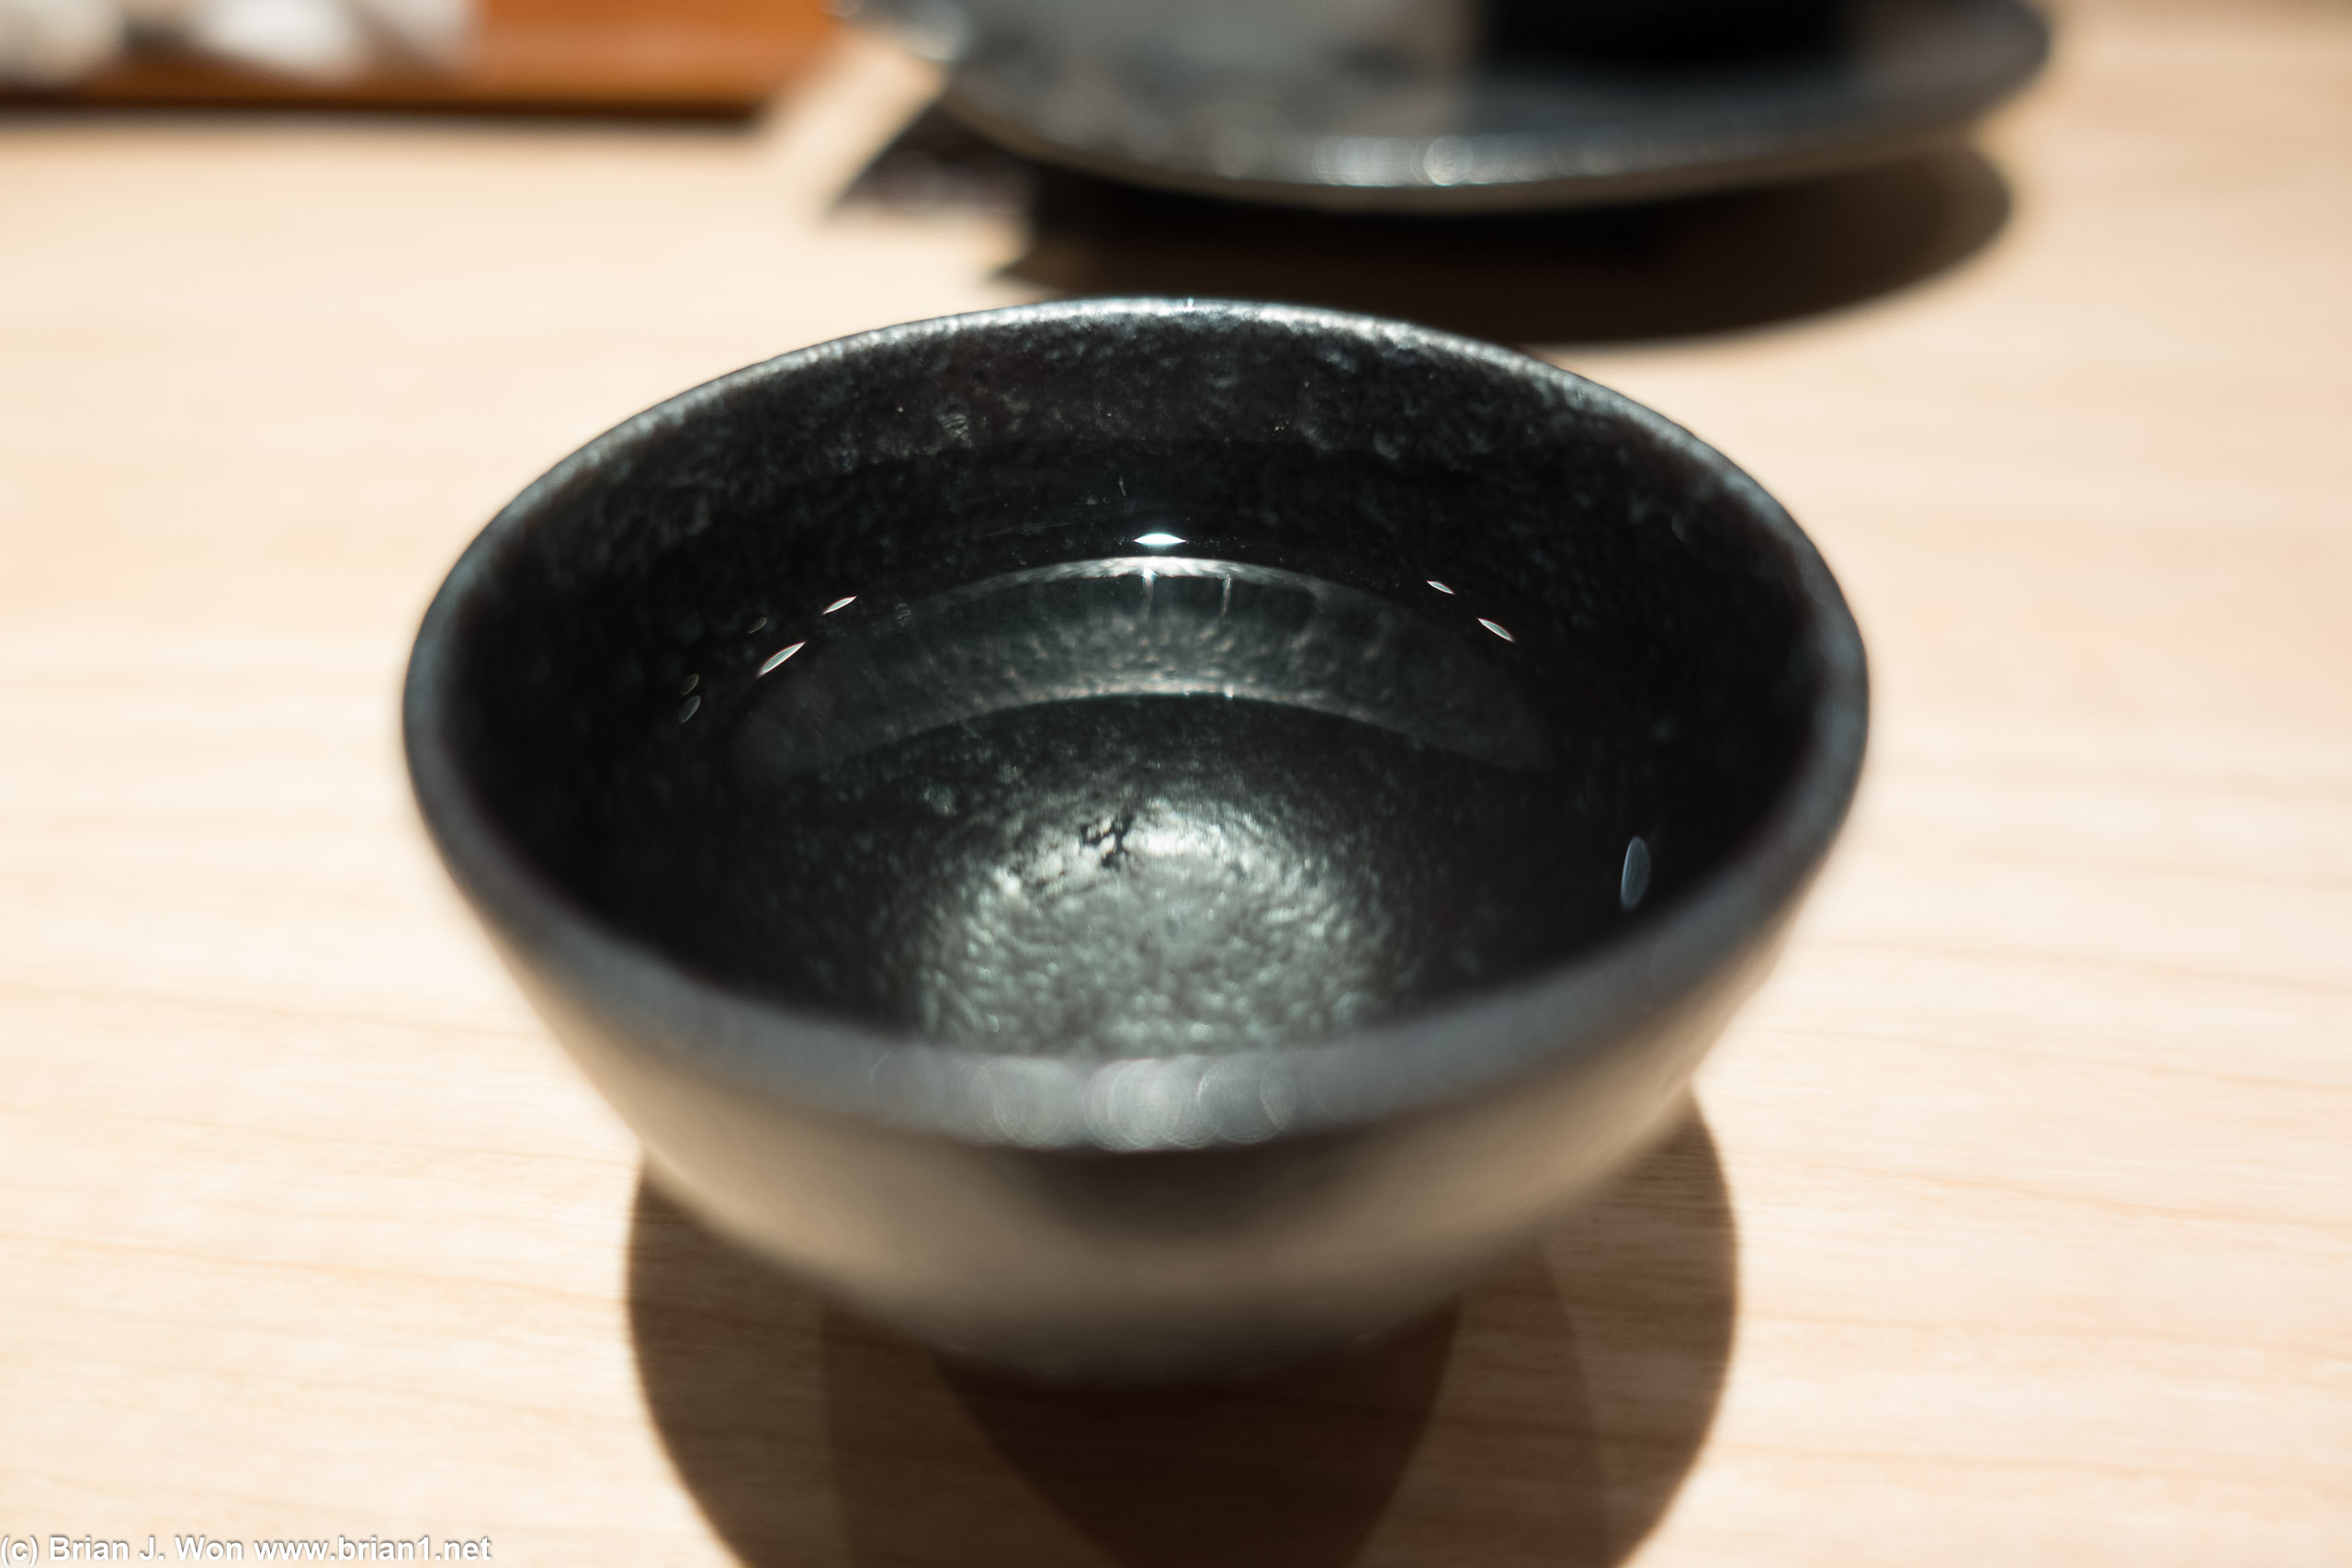 Reflections in the sake cup.